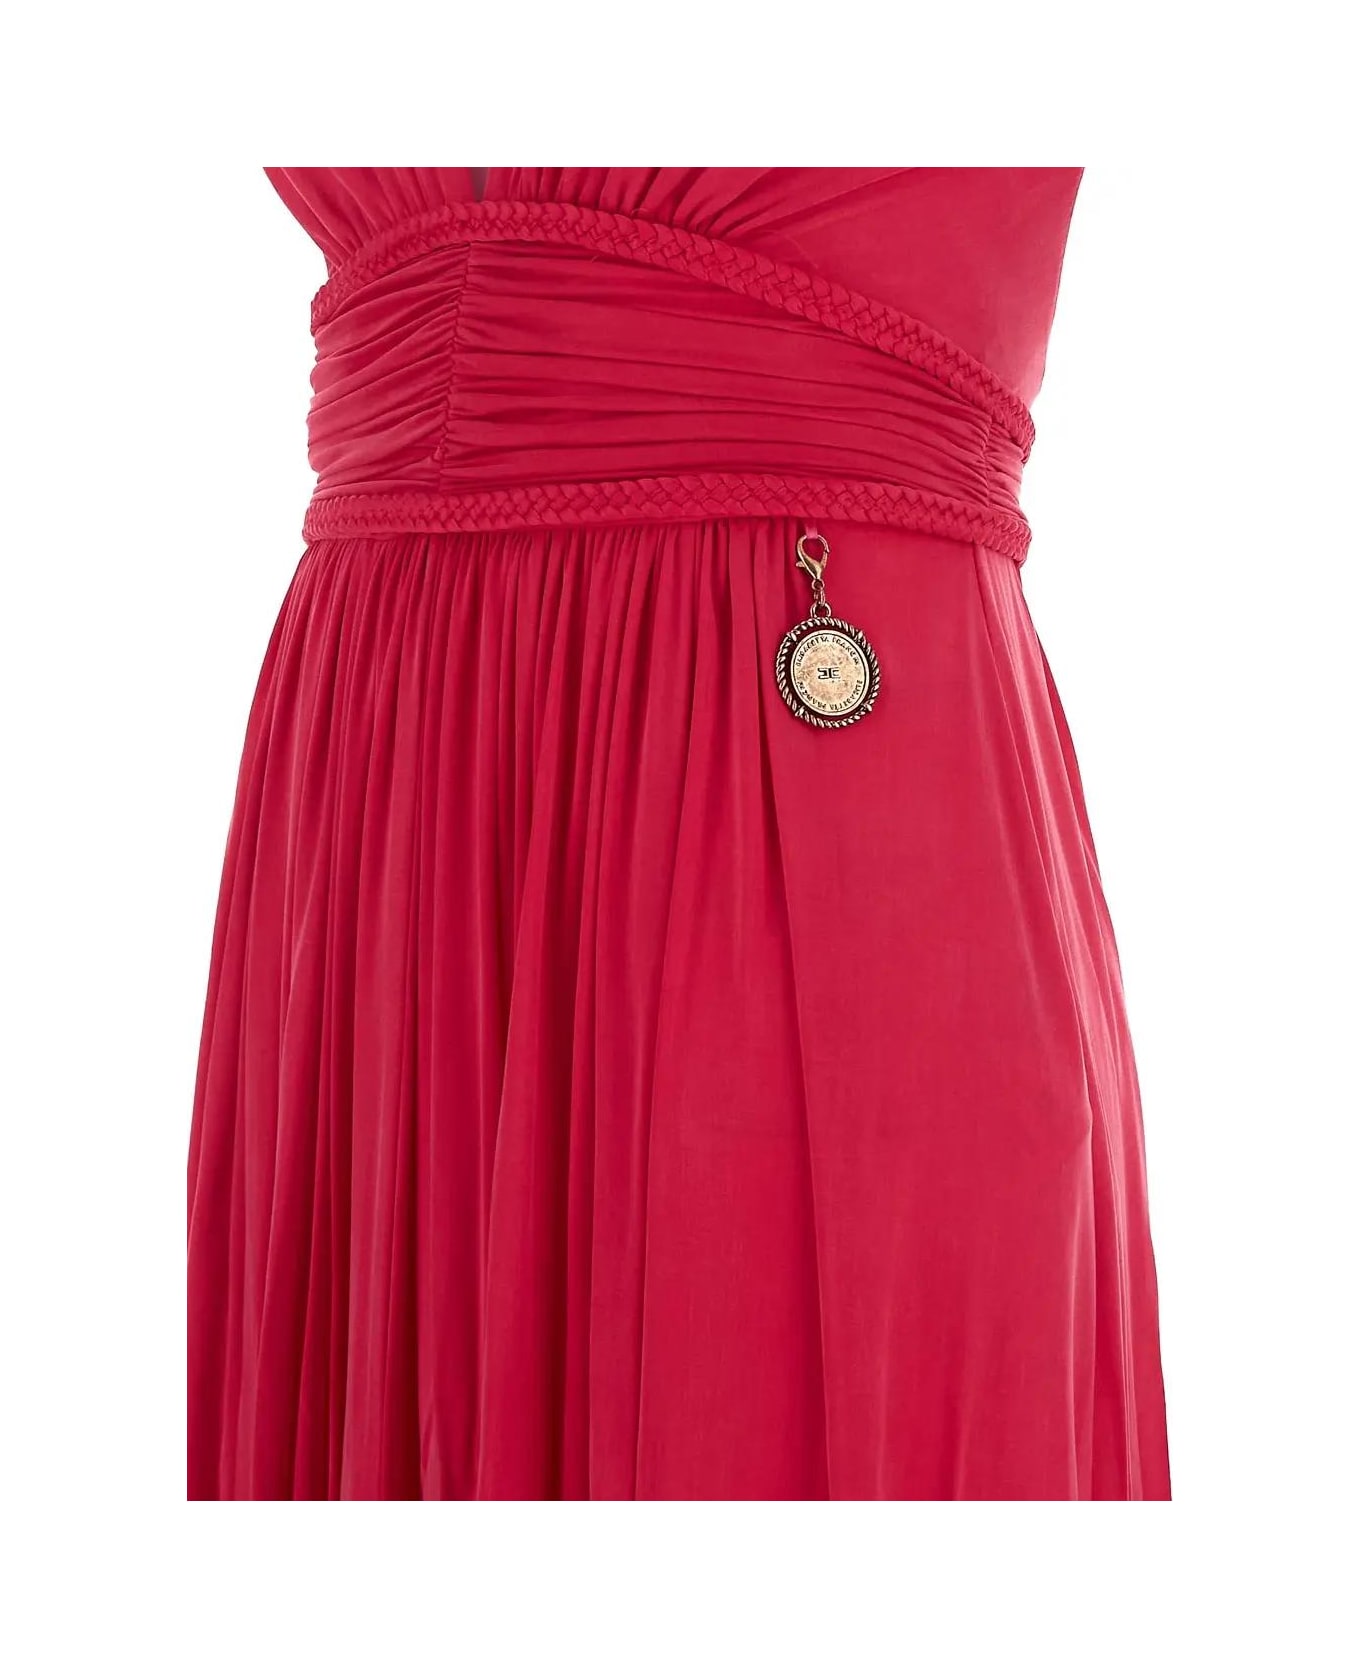 Elisabetta Franchi Red Carpet Dress With Intertwined Straps - PINK